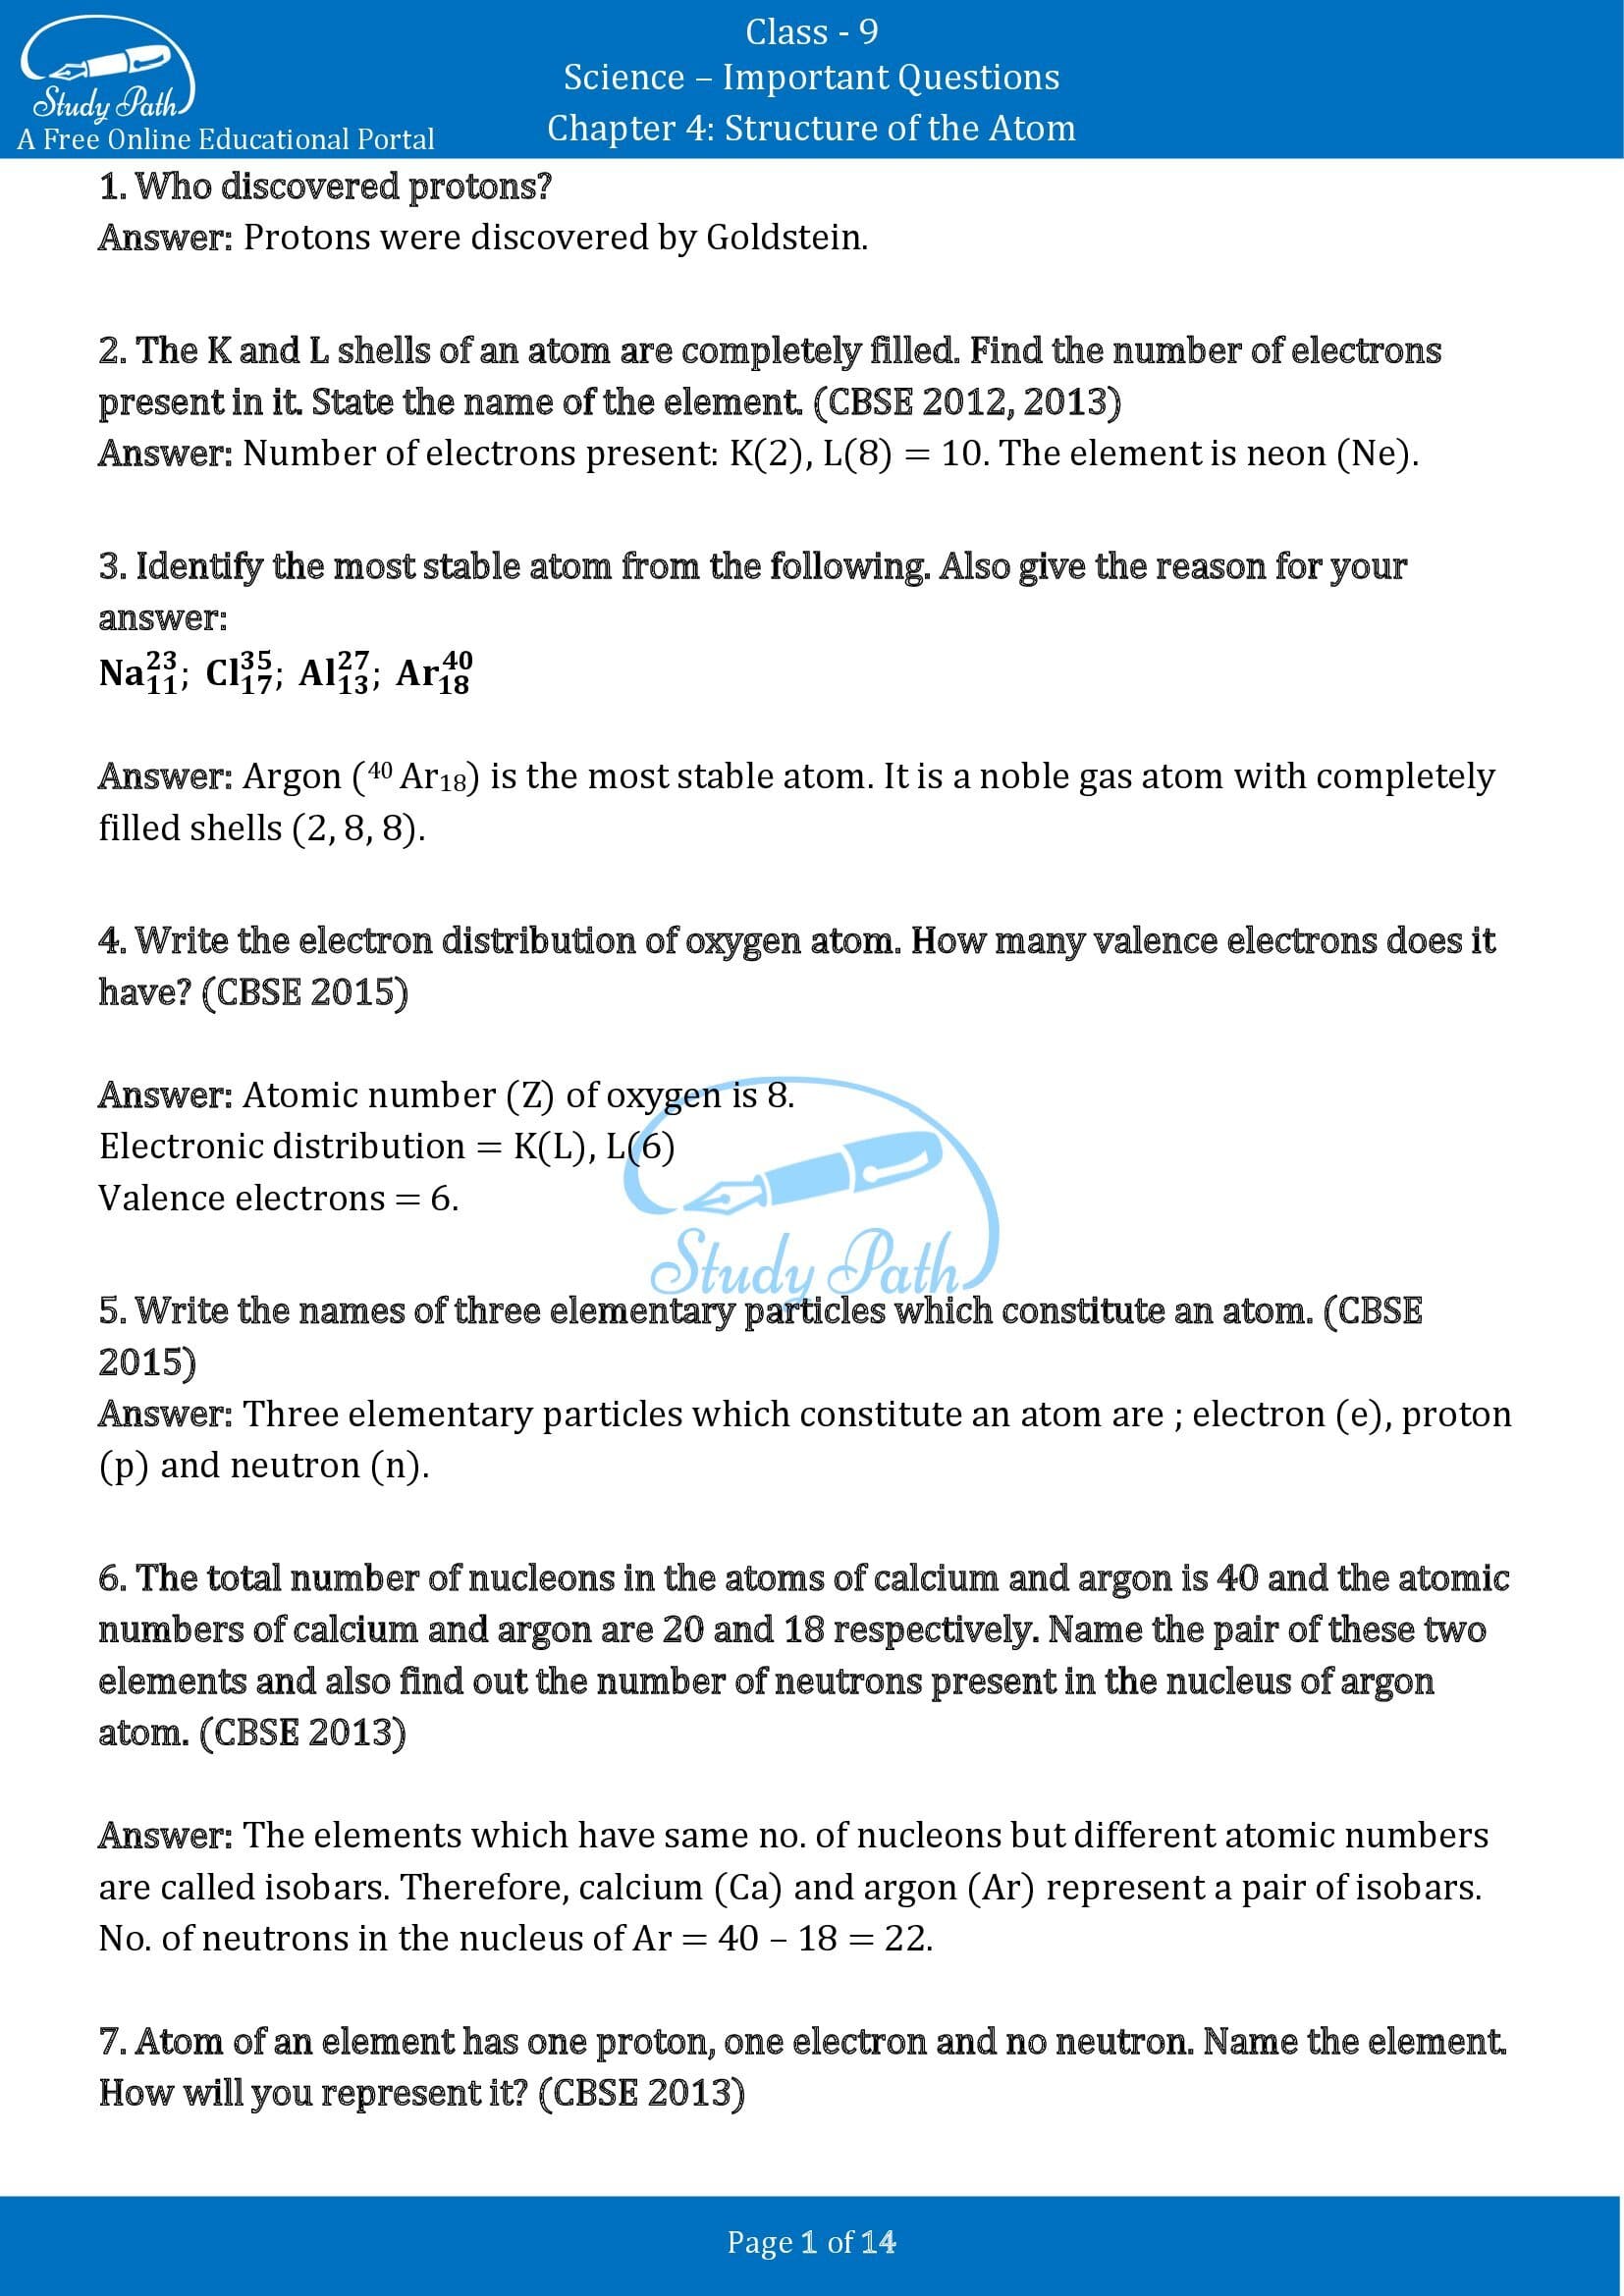 Important Questions for Class 9 Science Chapter 4 Structure of the Atom 00001